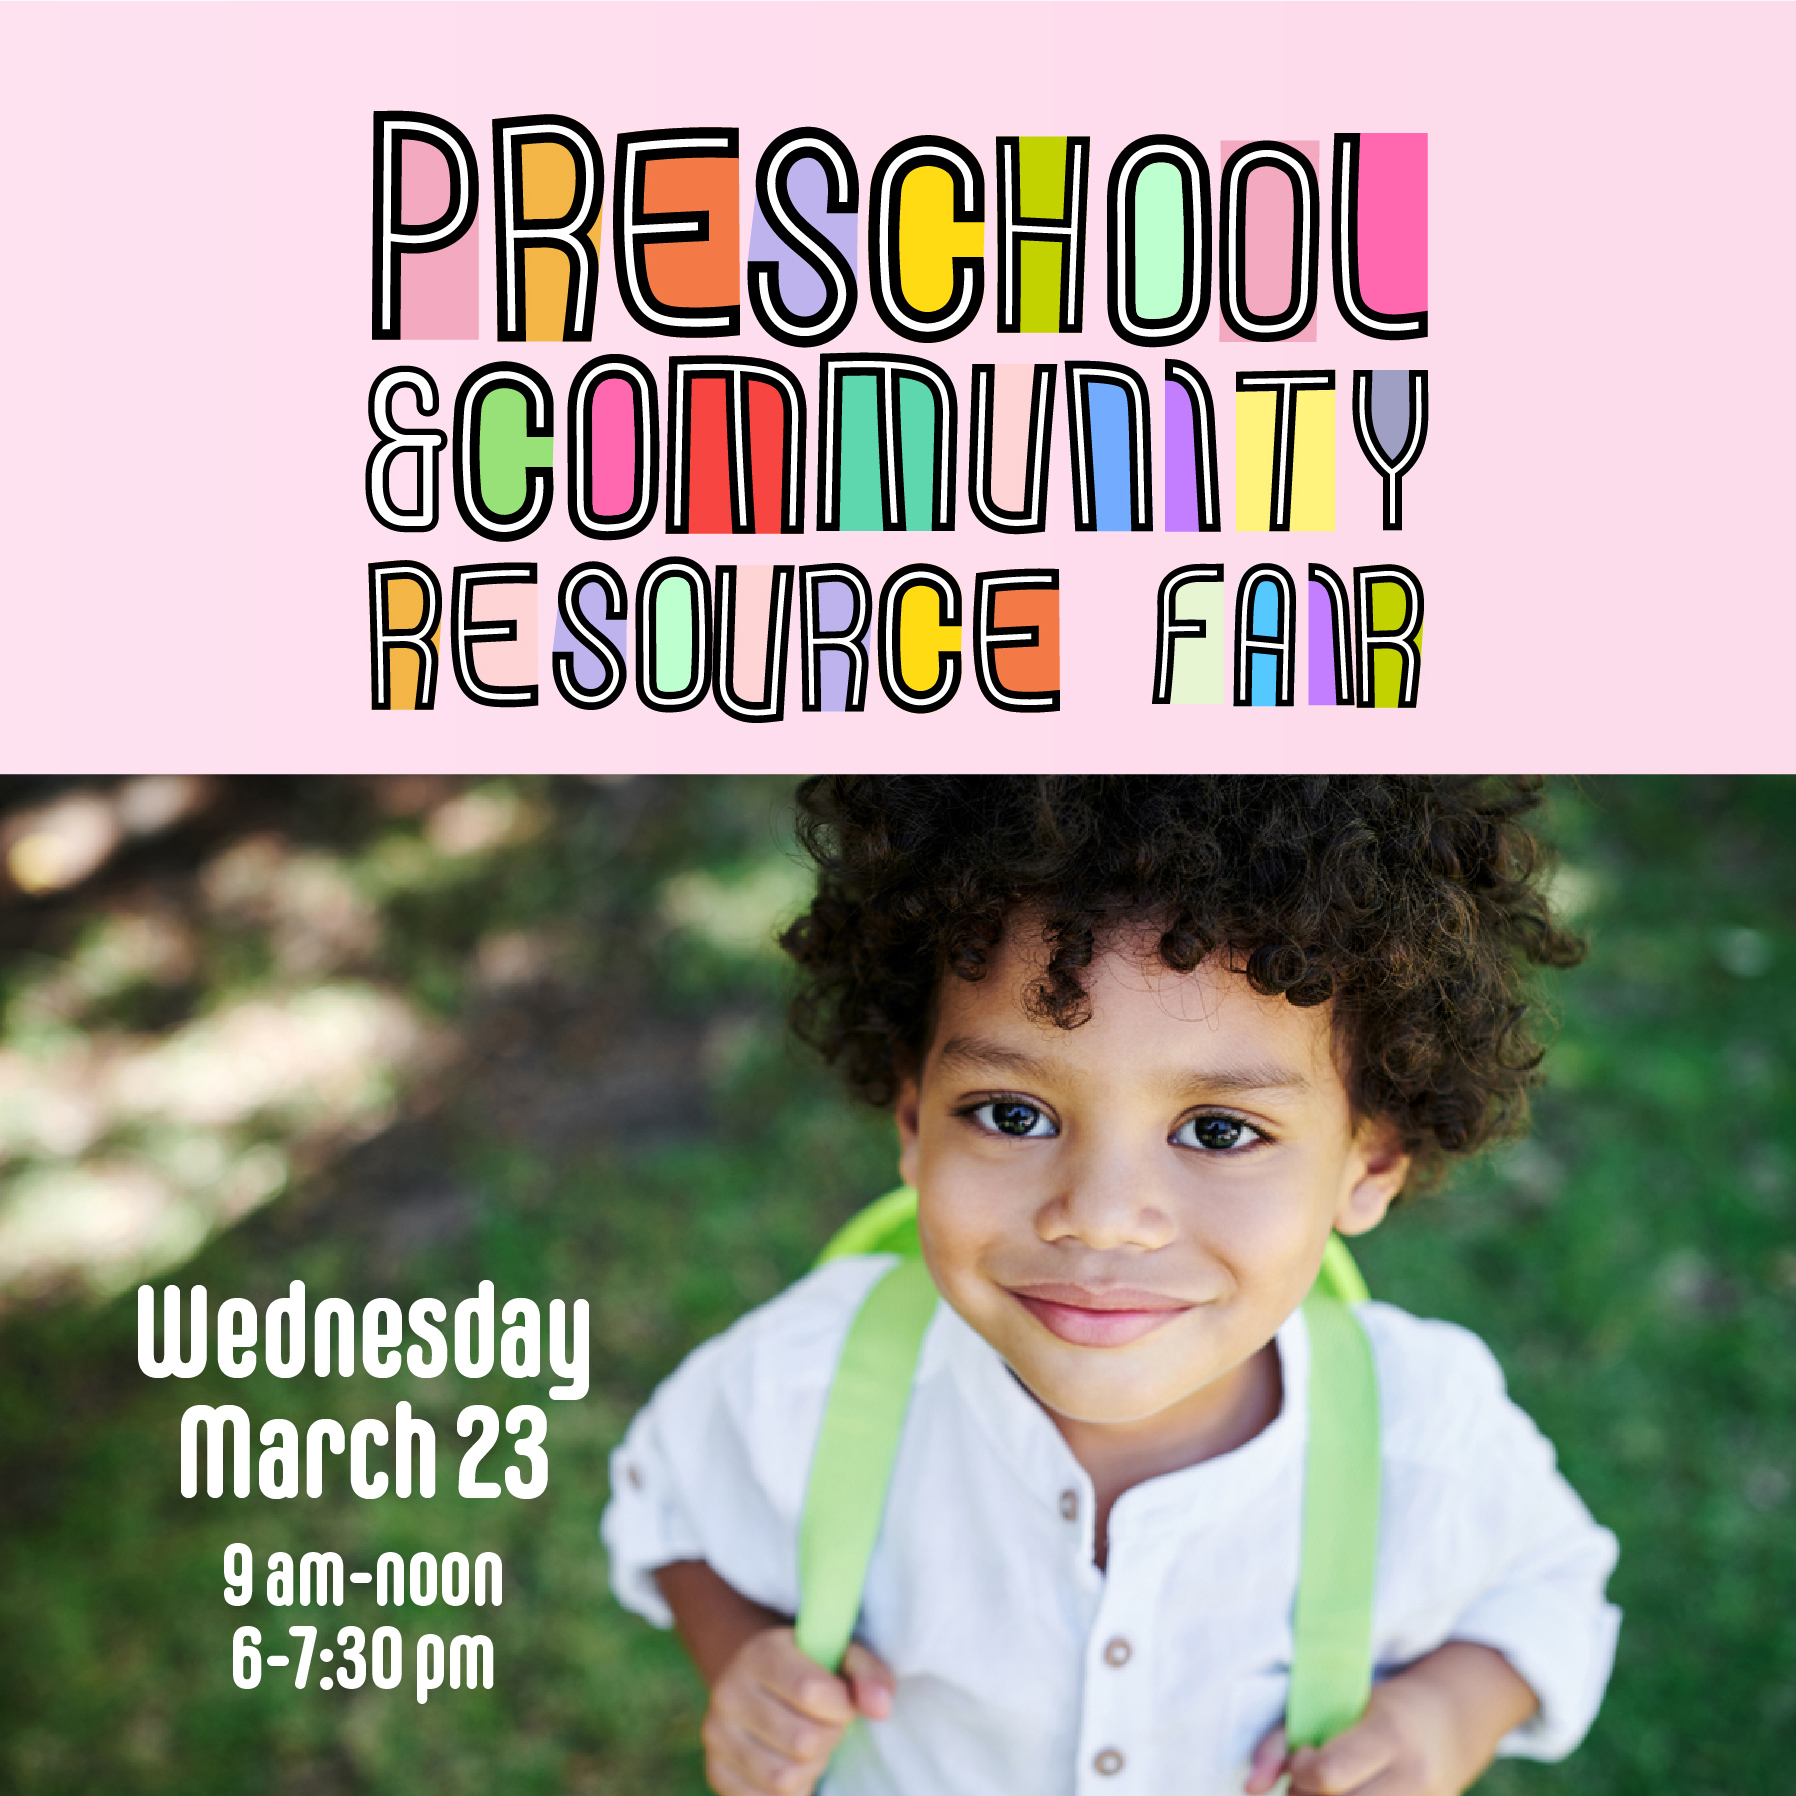 Image of child wearing backpack outside and "Preschool & Community Resource Fair" text